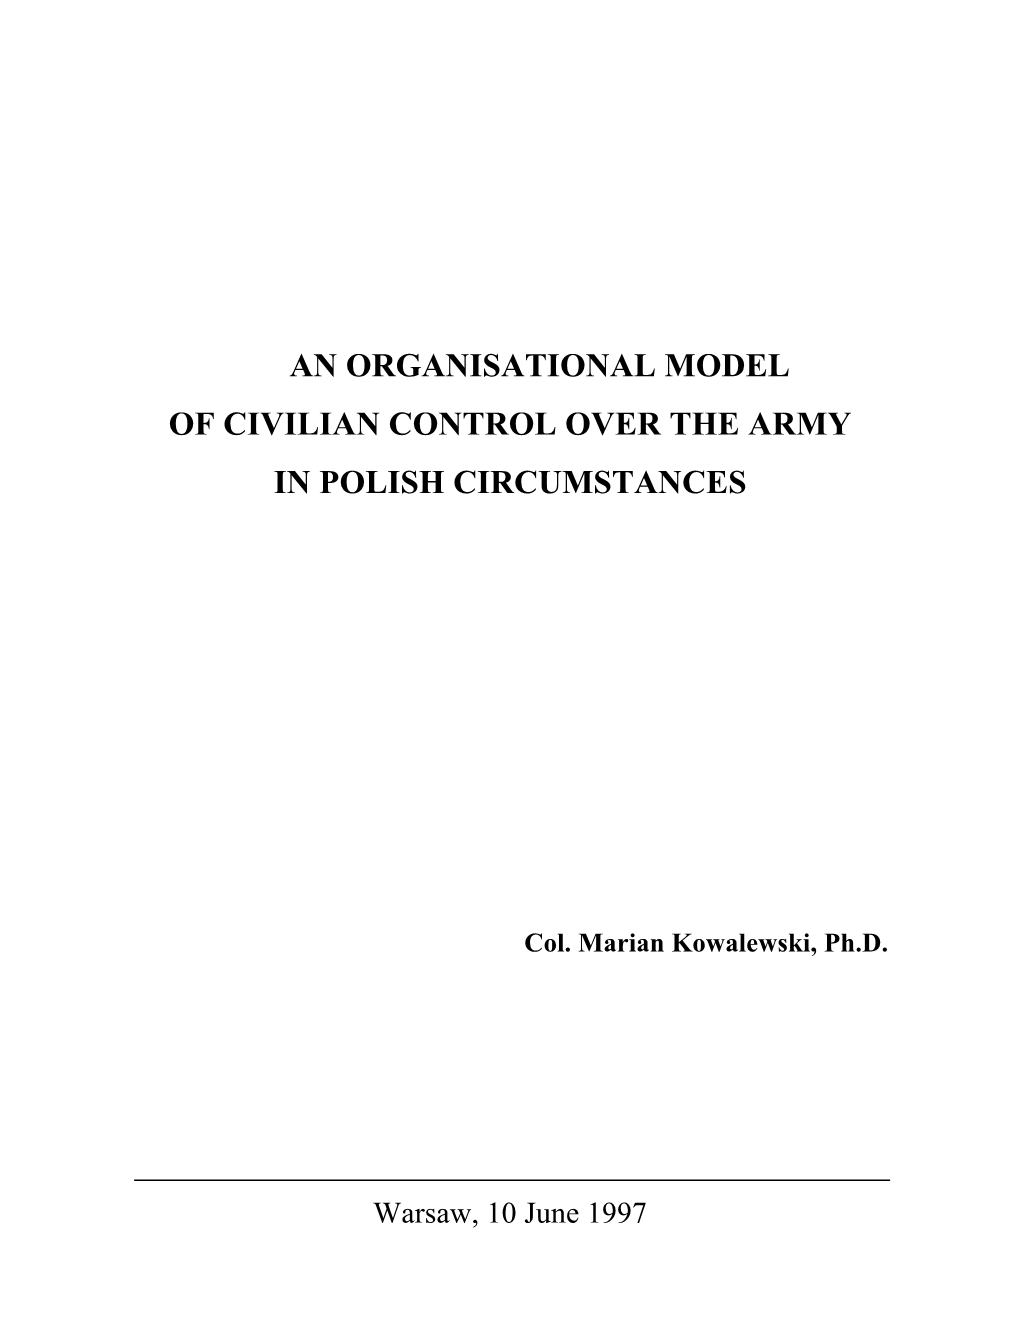 An Organisational Model of Civilian Control Over the Army in Polish Circumstances